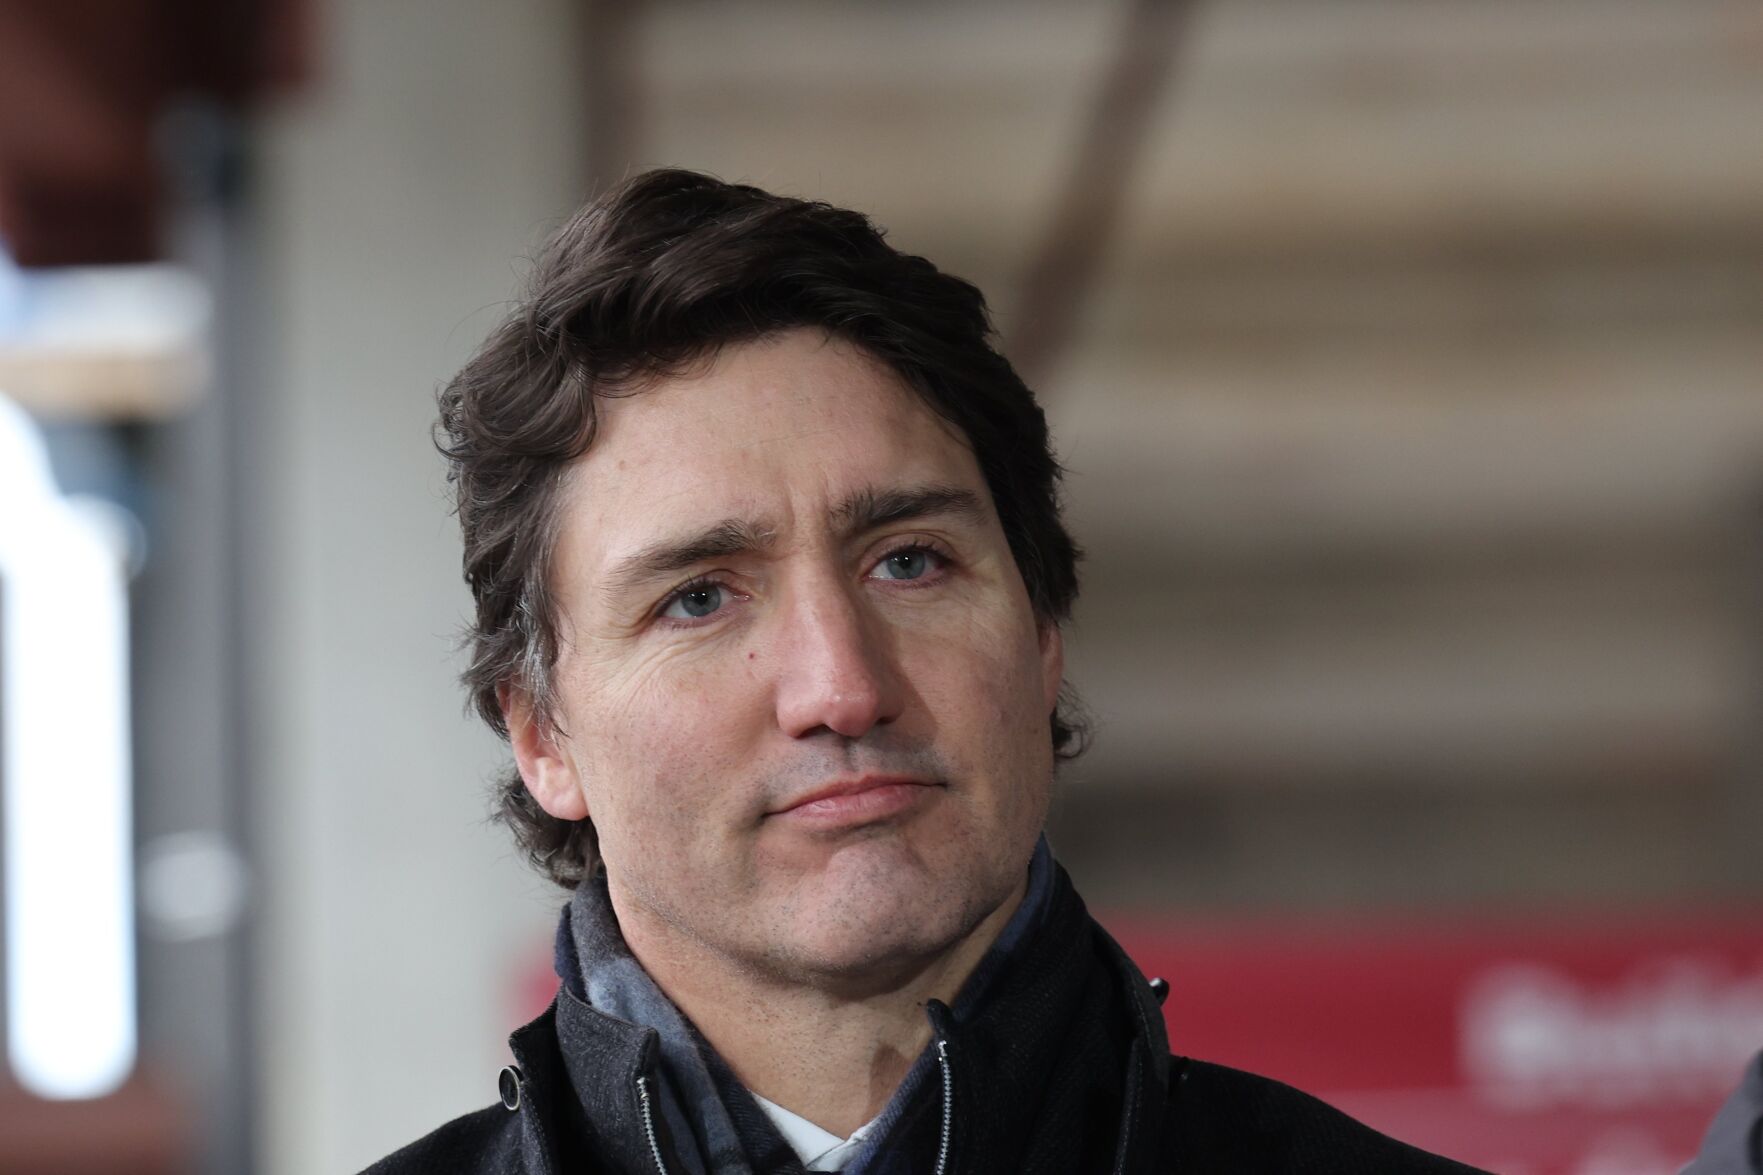 Justin Trudeau’s Jamaica trip prompts questions to ethics watchdog about gifts to politicians